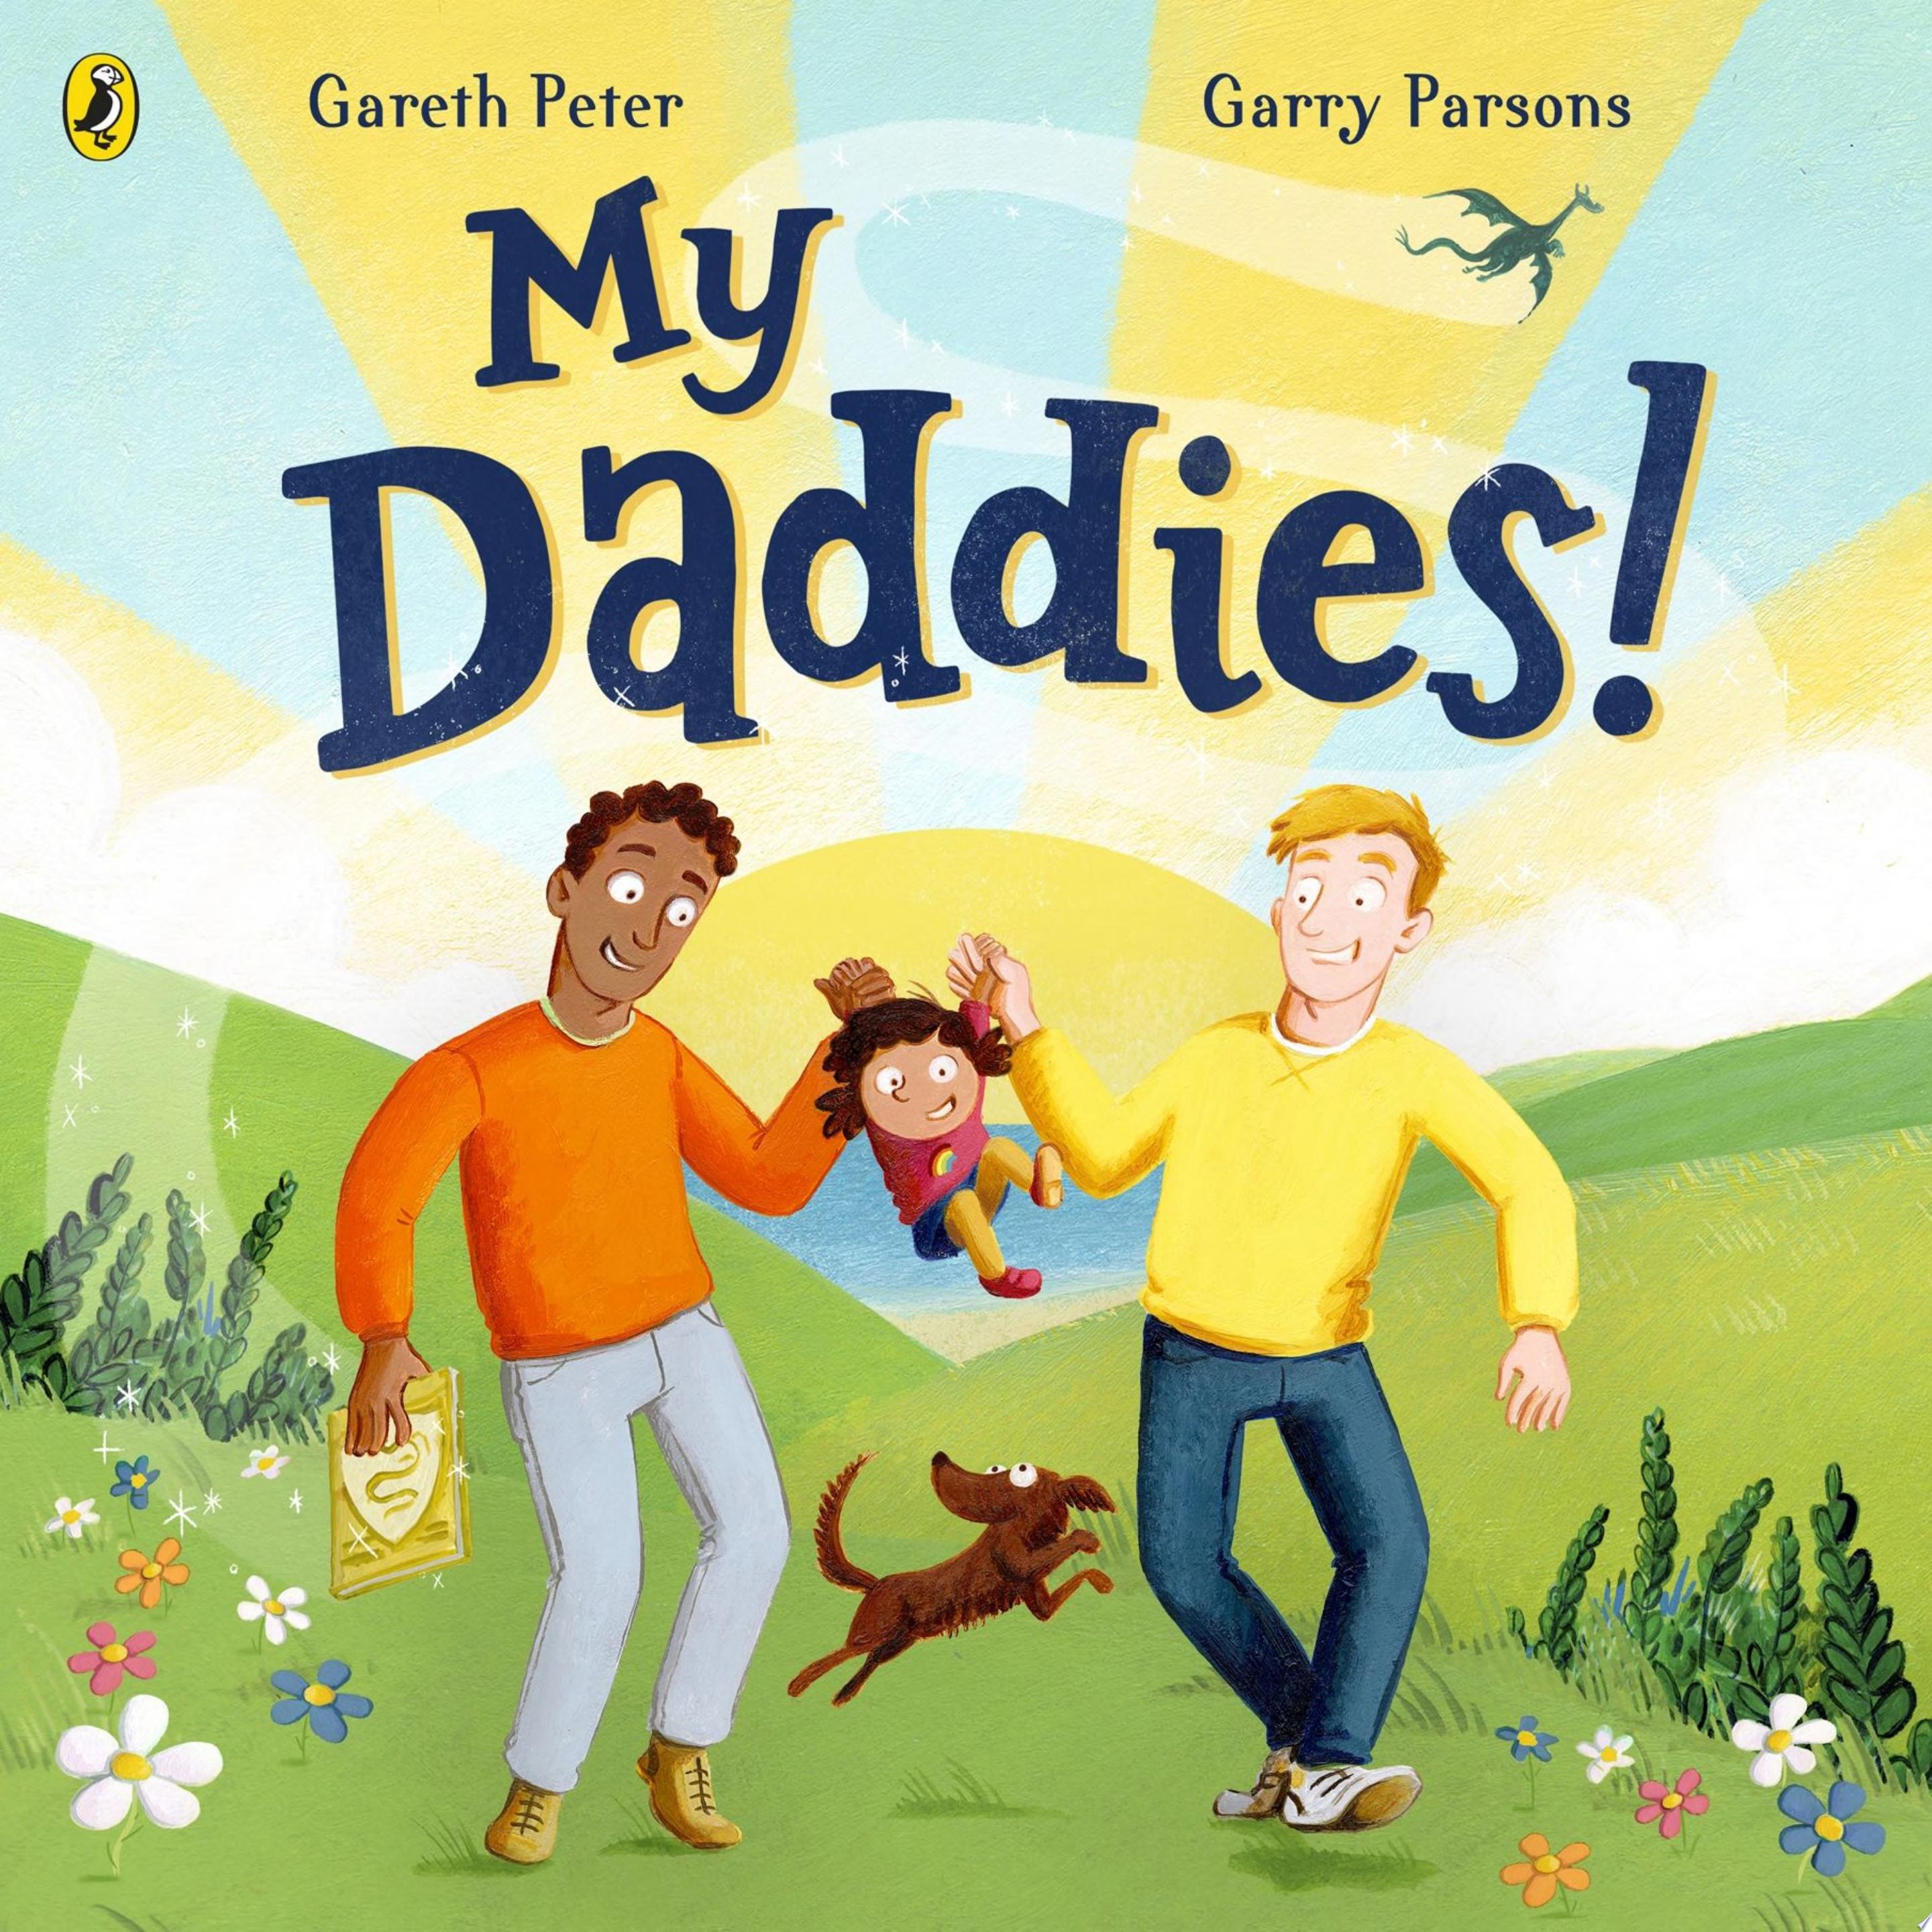 Image for "My Daddies!"